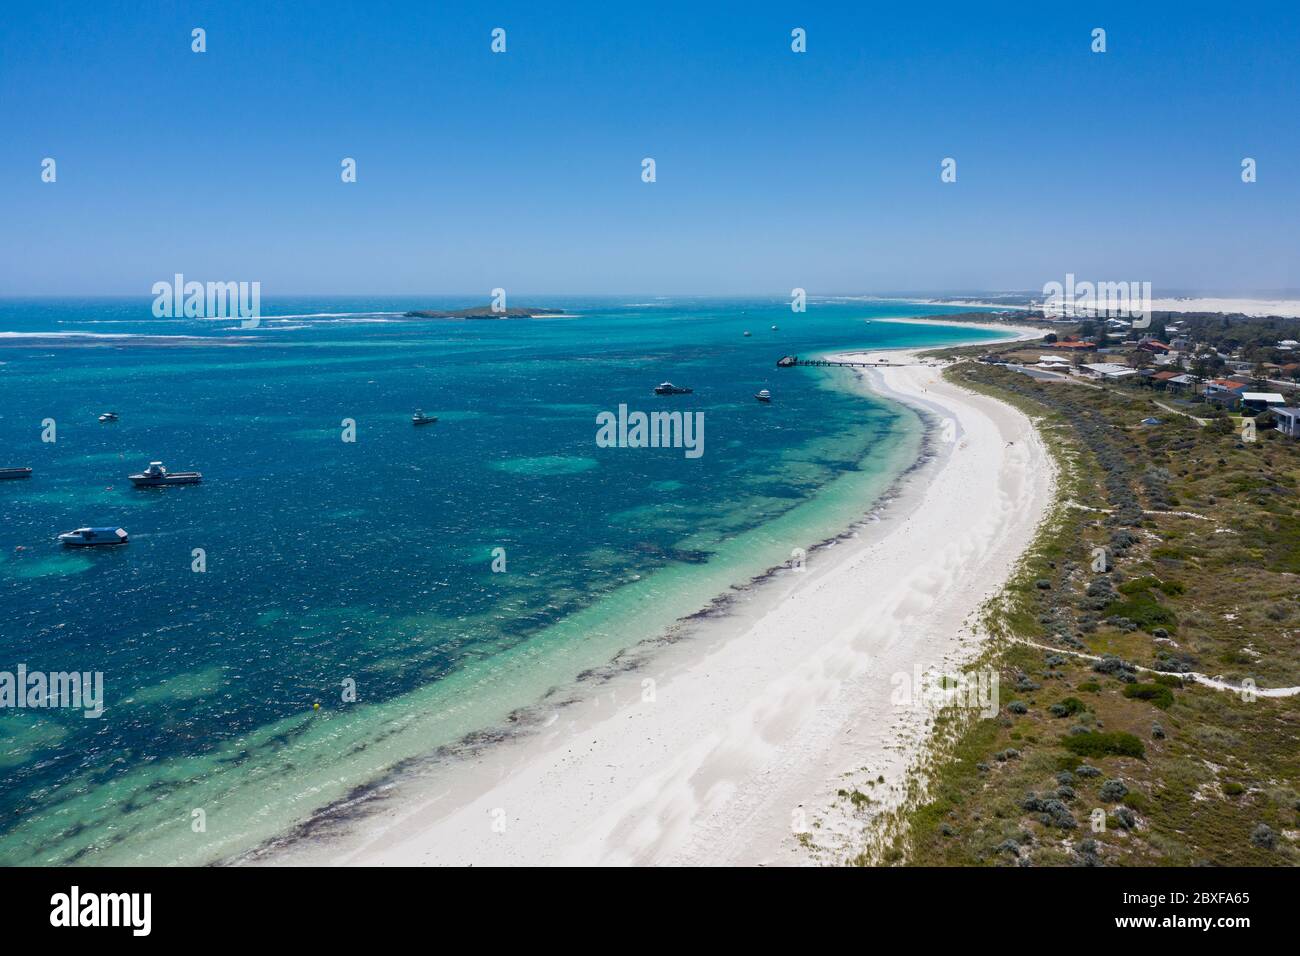 The beach and coastline of Lancelin, a small town north of Perth in Western Australia, famous for it's interior sand dunes Stock Photo